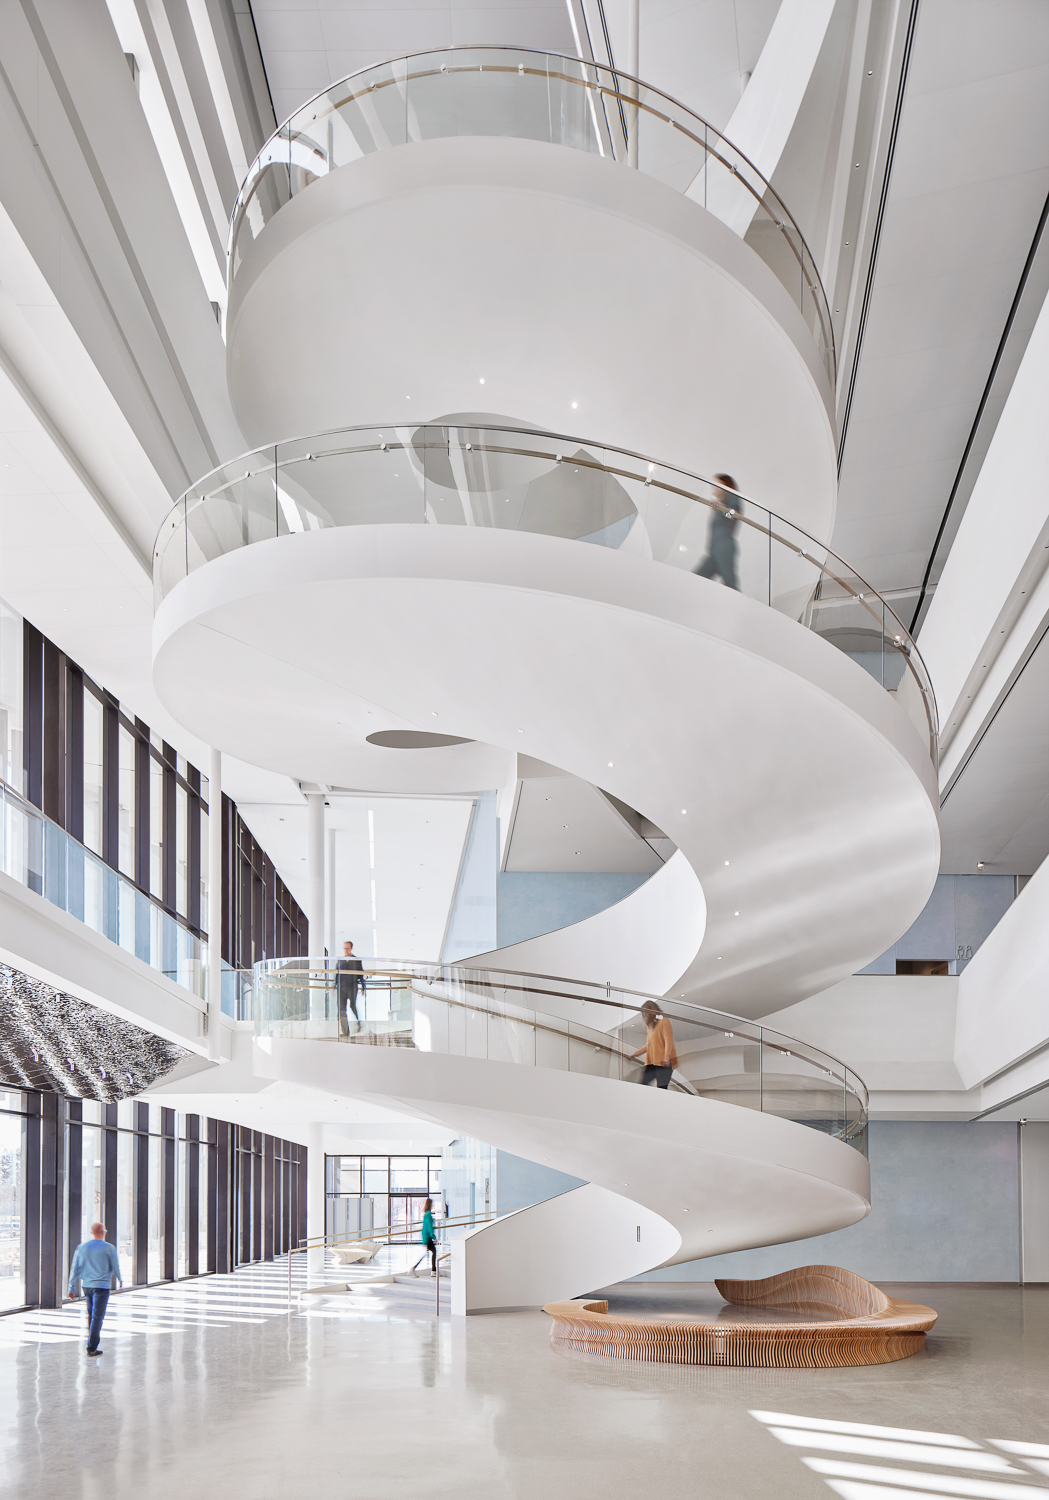 3-story curved white staircase with people walking on it